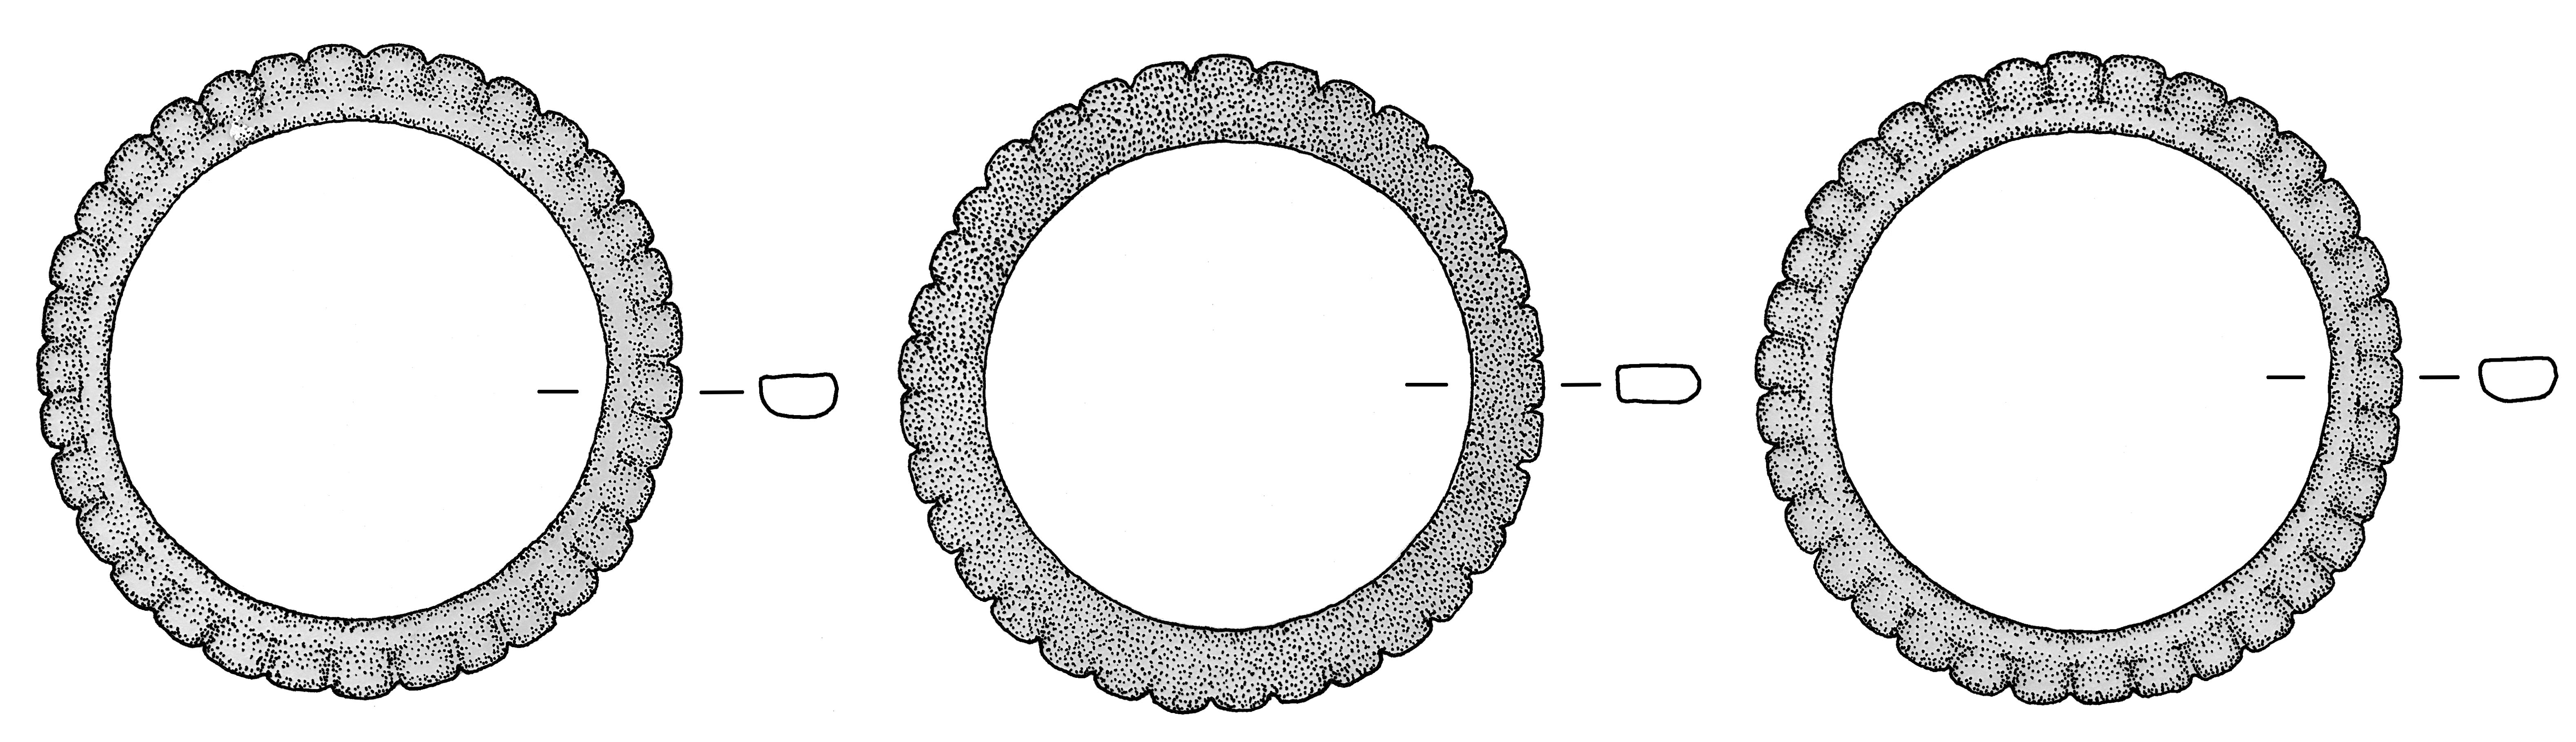 BC 0708B/1594<br>outer diameter=6.8 cm
inner diameter=5.1 cm
shaft height=0.4 cm
shaft width=0.8 cm
scalloped edges
Object is one of three rings: one ring has flat top and bottom surfaces, two rings have one flat and one convex surface, allowing the rings to fit together as a set. Knobs are 0.5 cm. 